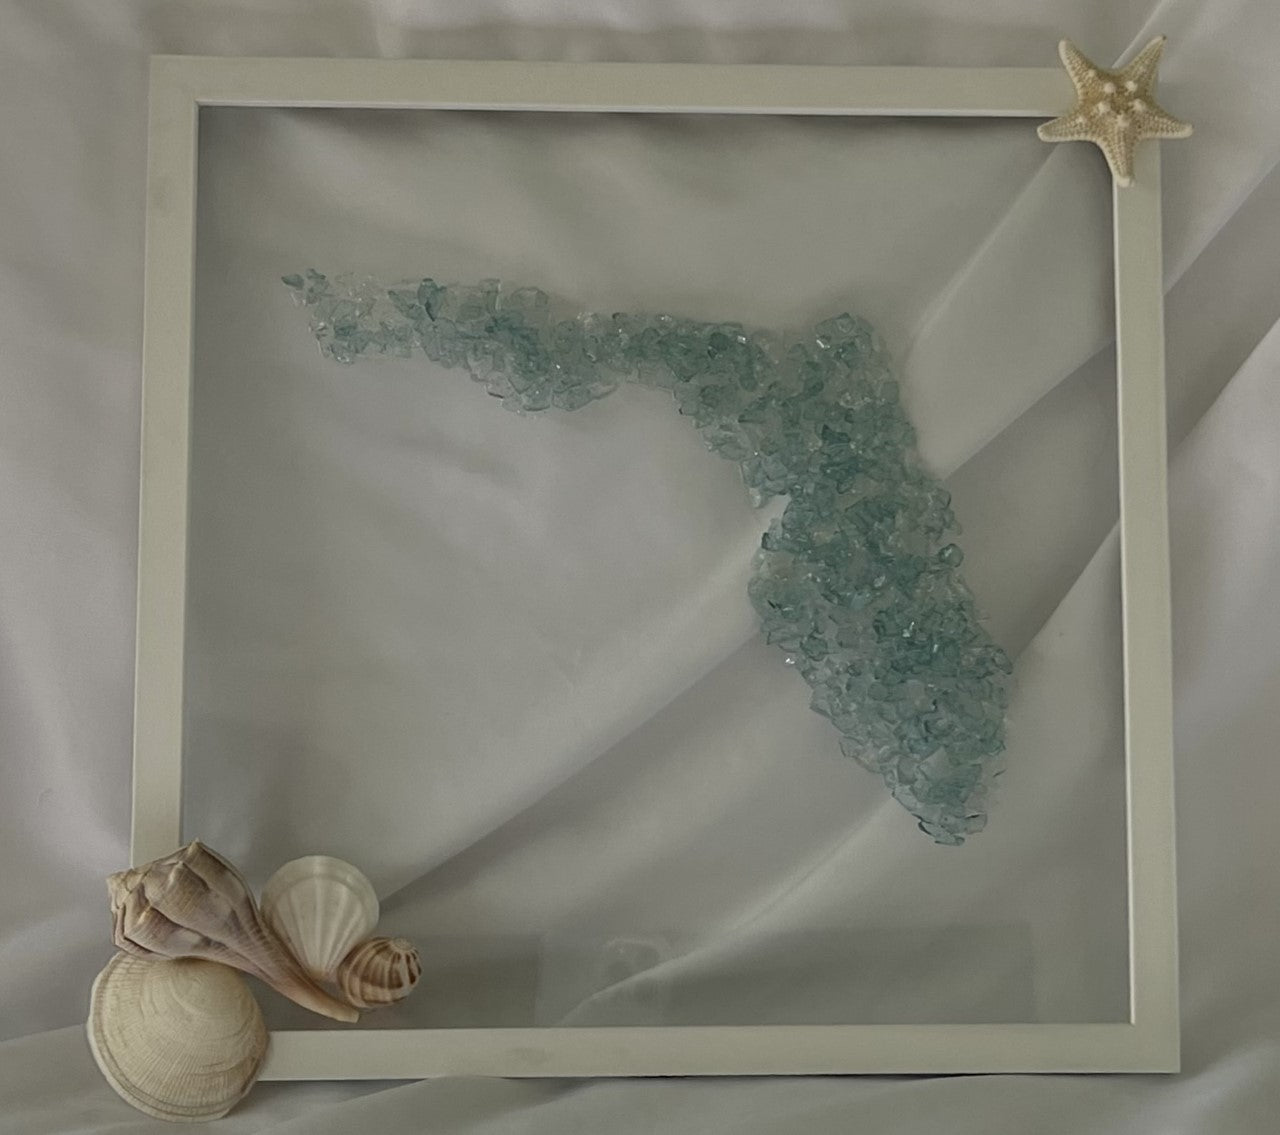 State of Florida on Glass